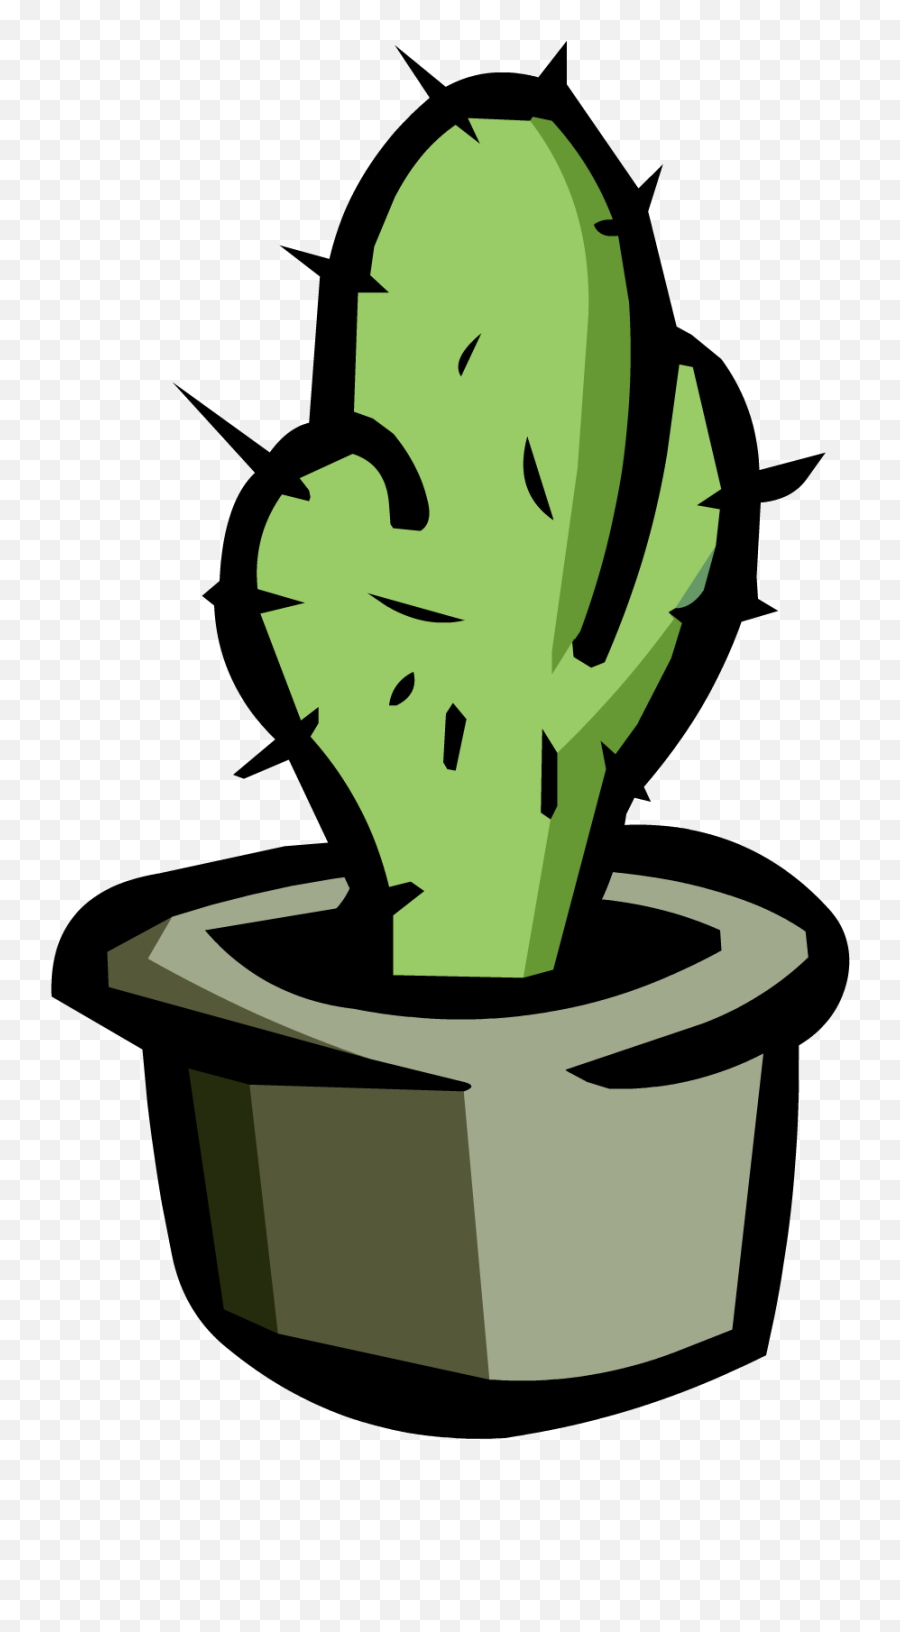 Cactus Png Image Free Picture Download - Png Cactus Clipart,Cactus Clipart Png